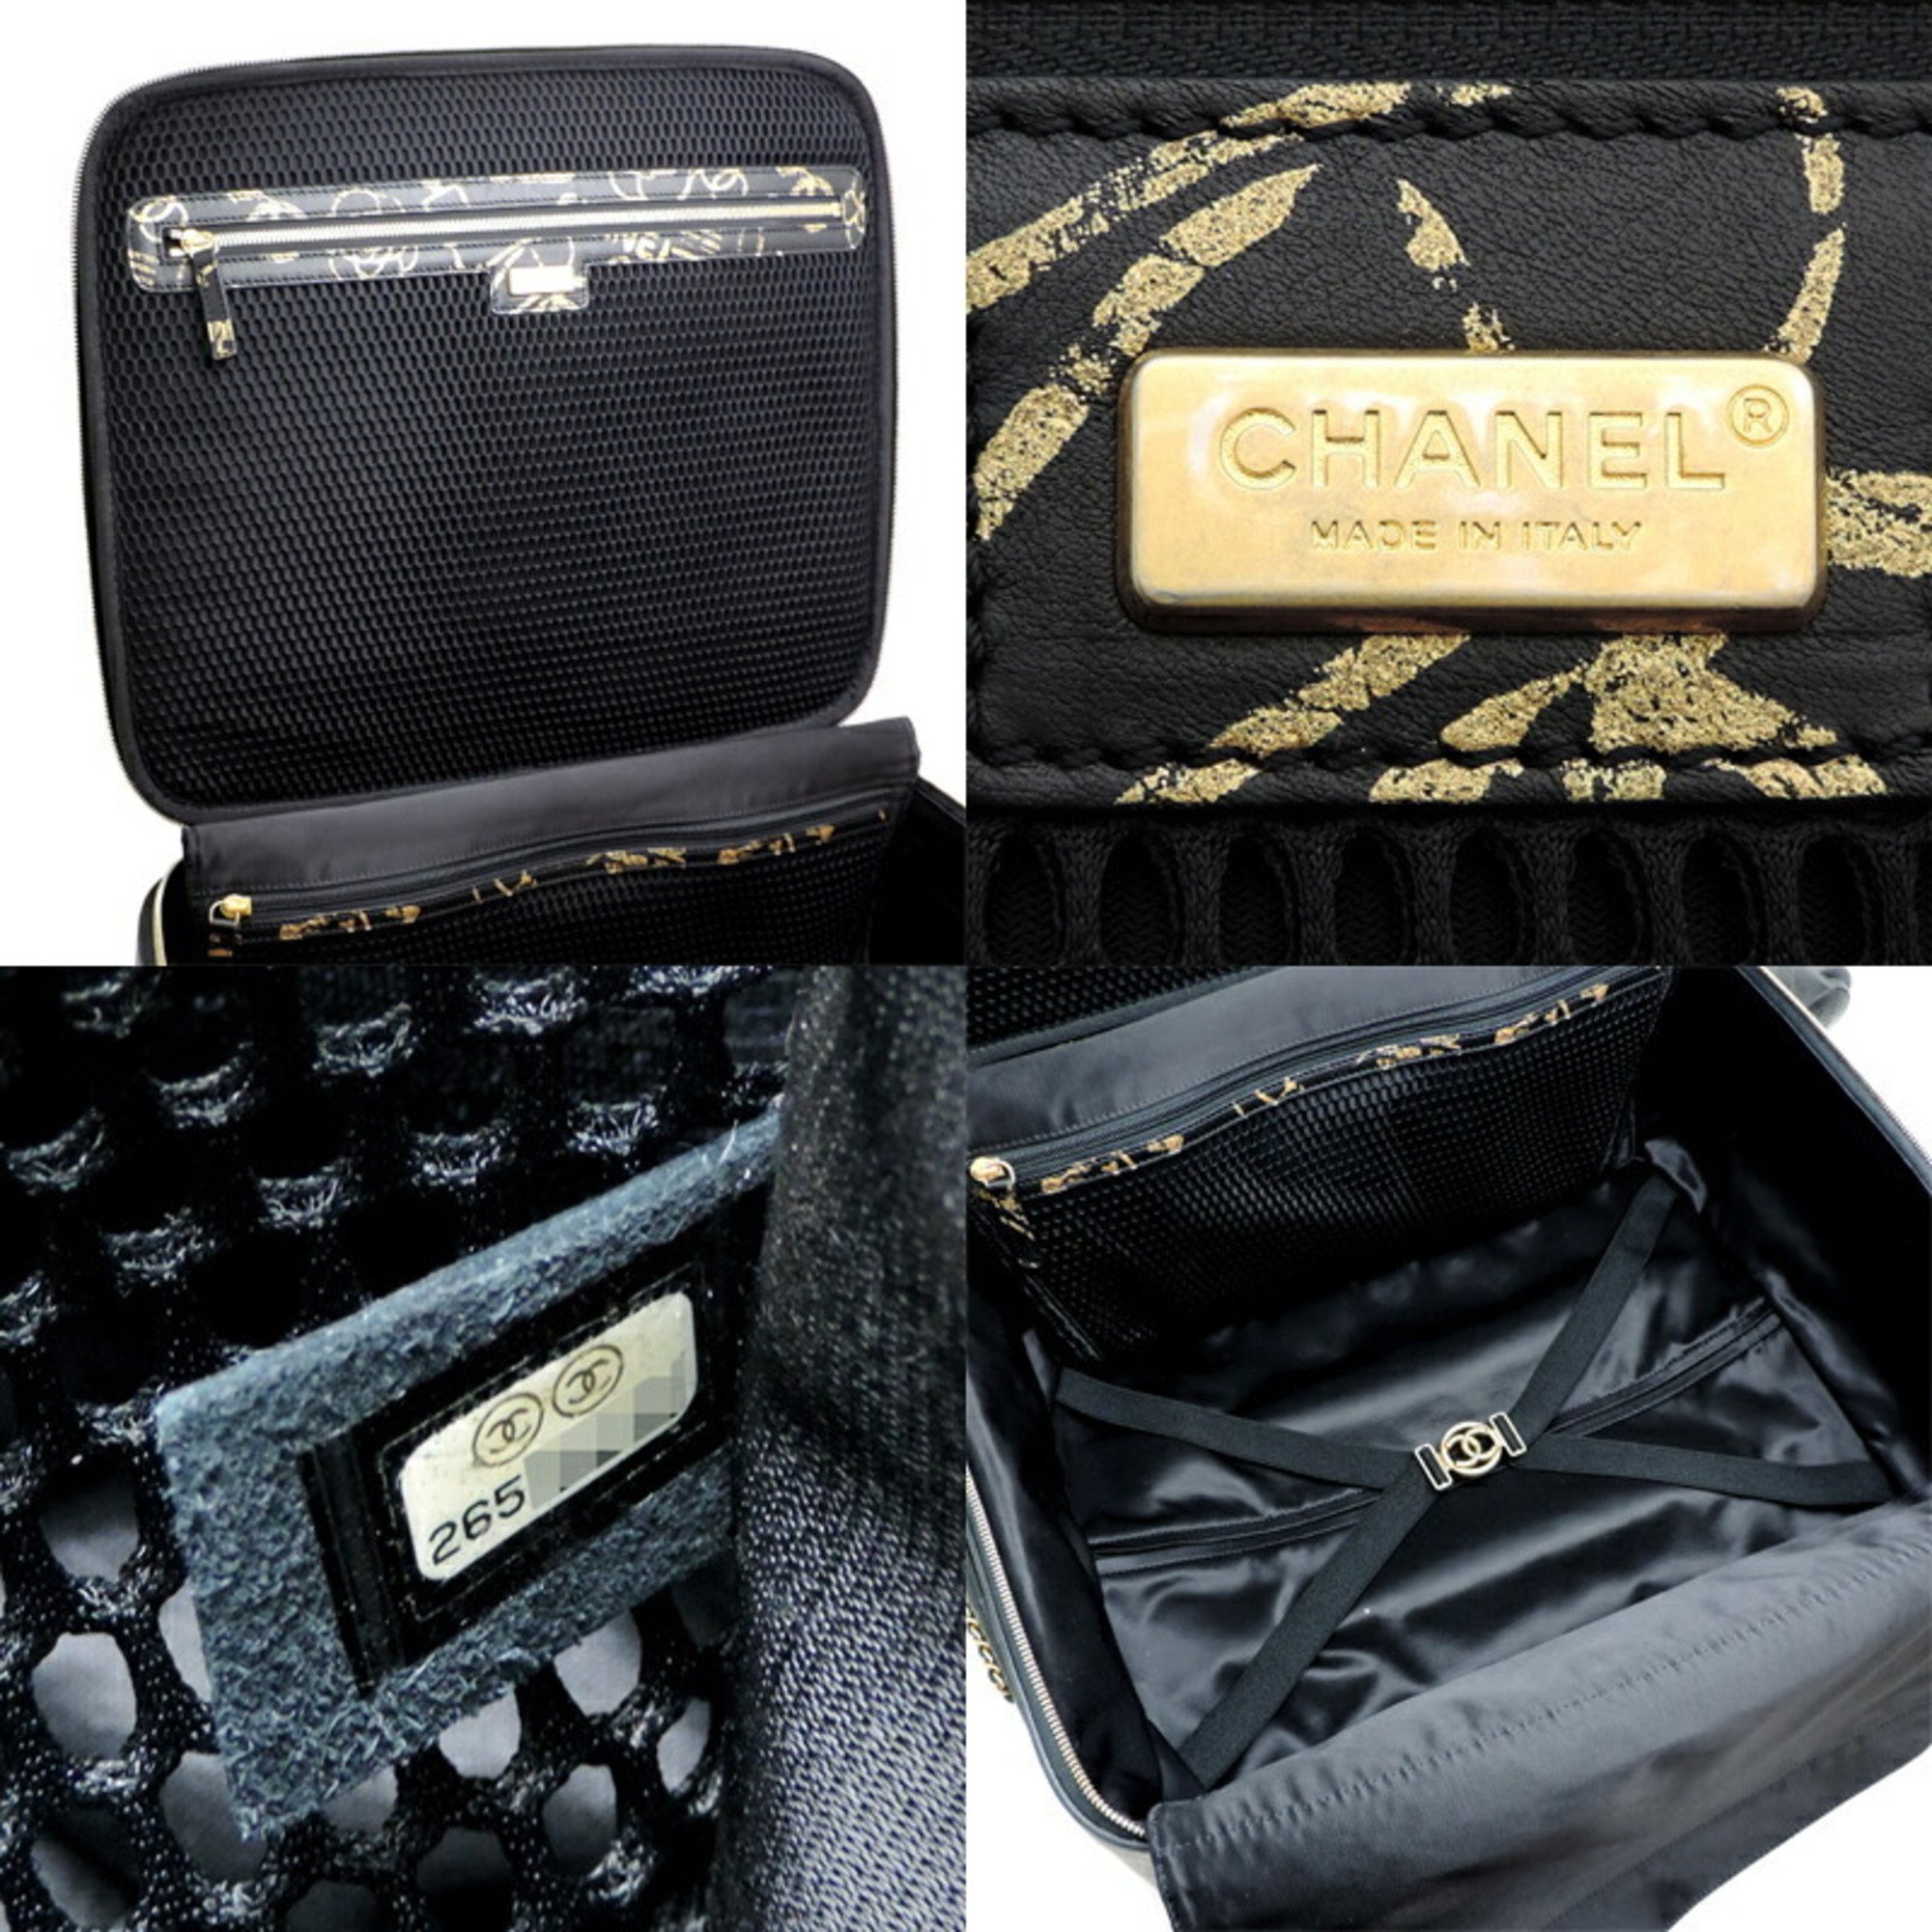 Chanel Women's/Men's Carry Bag Leather